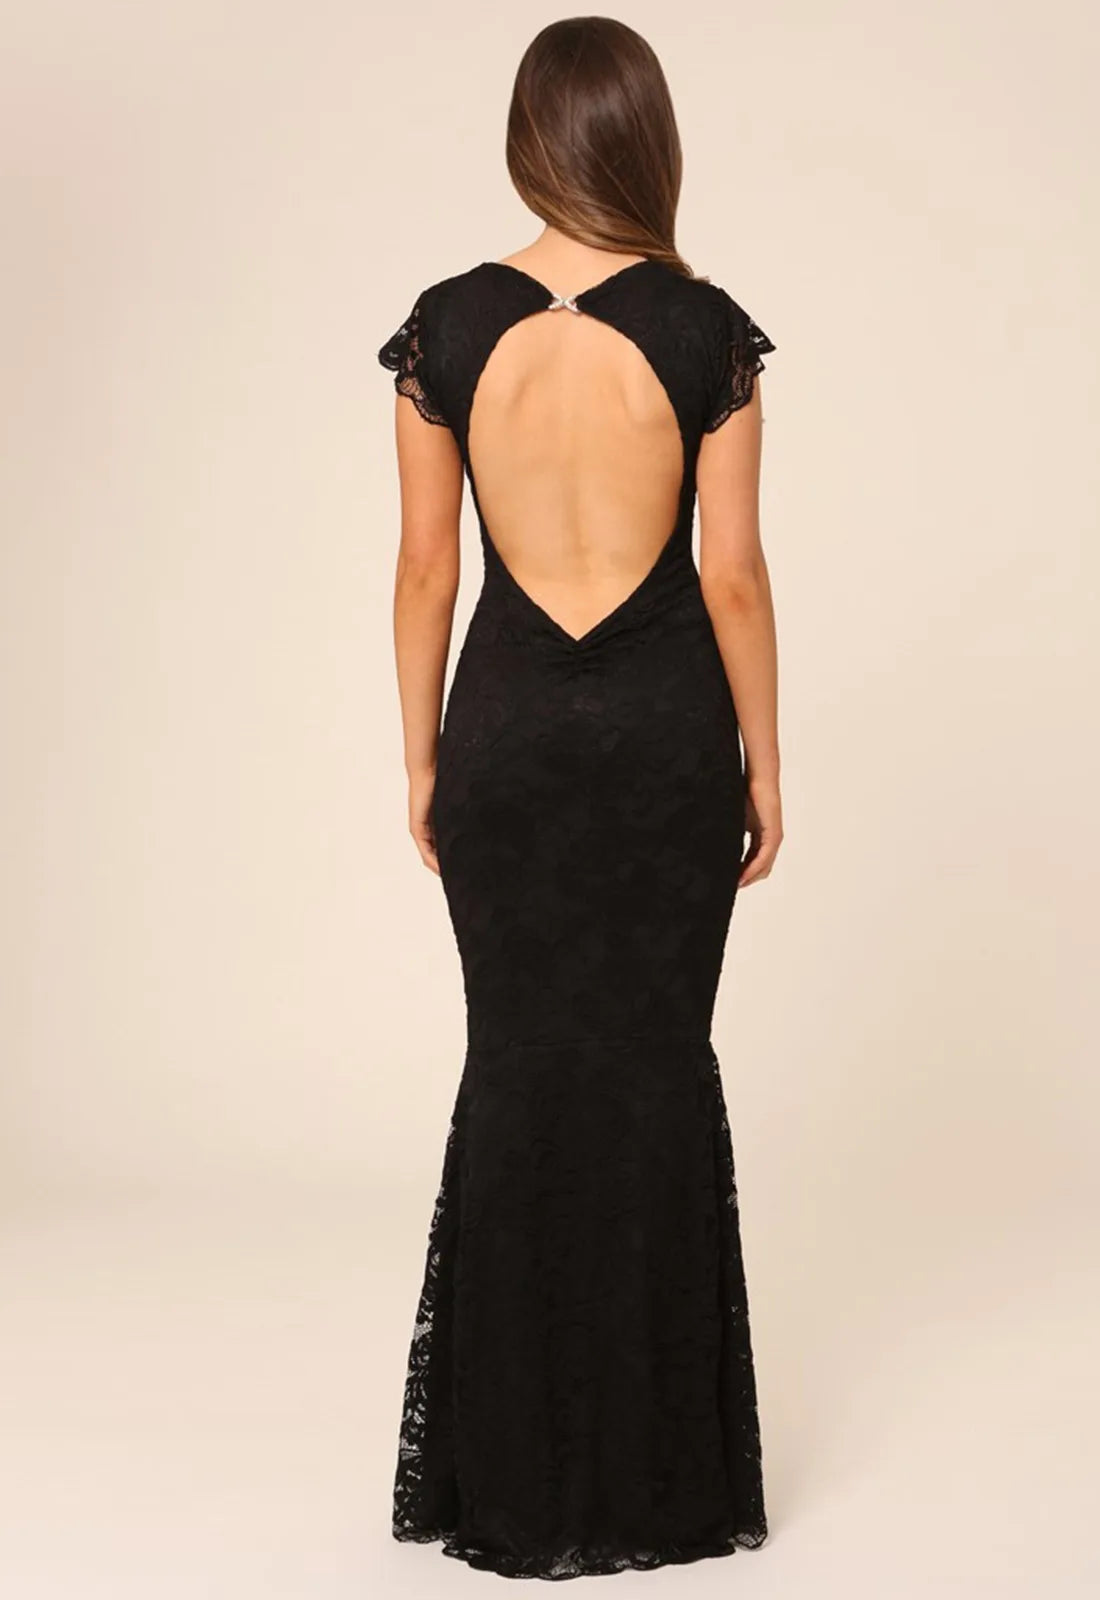 Honor Gold Faye Cap Sleeve Backless Lace Maxi Dress in Black-14298